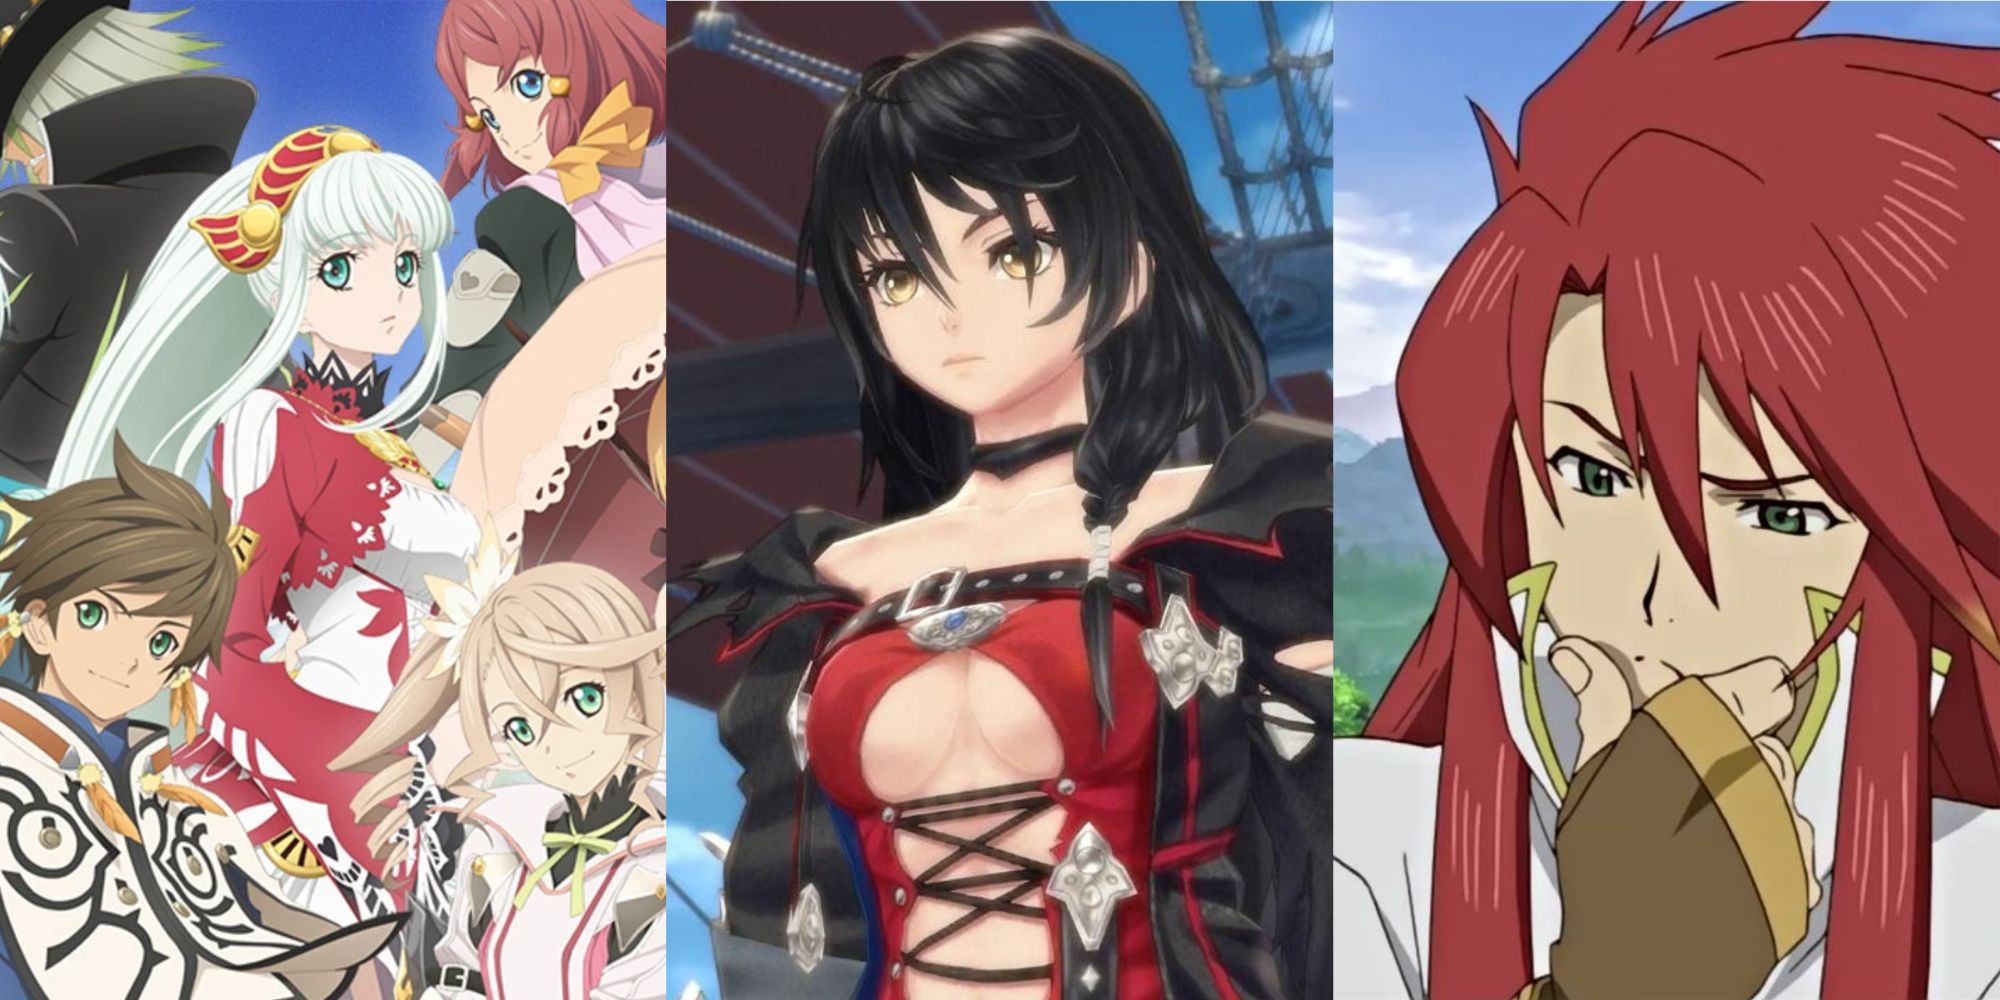 Heartbreaking Moments Tales Featured - Zestiria, Berseria, Abyss